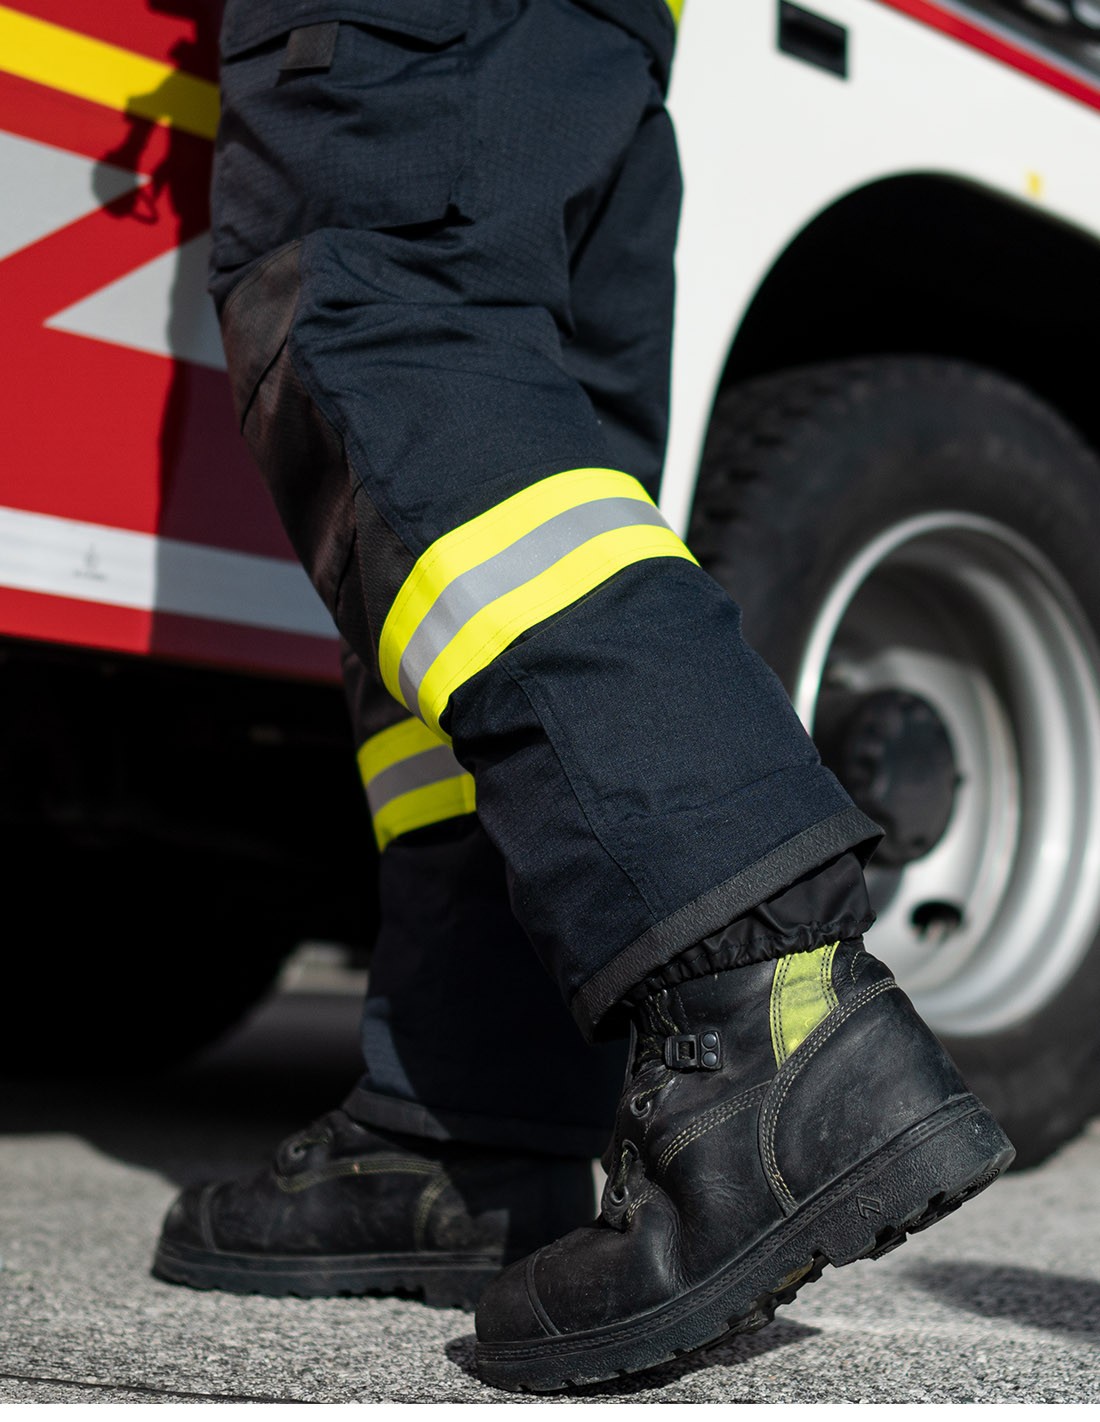 Fire fighting suit - VIKING YouSafe™ Spark Trousers